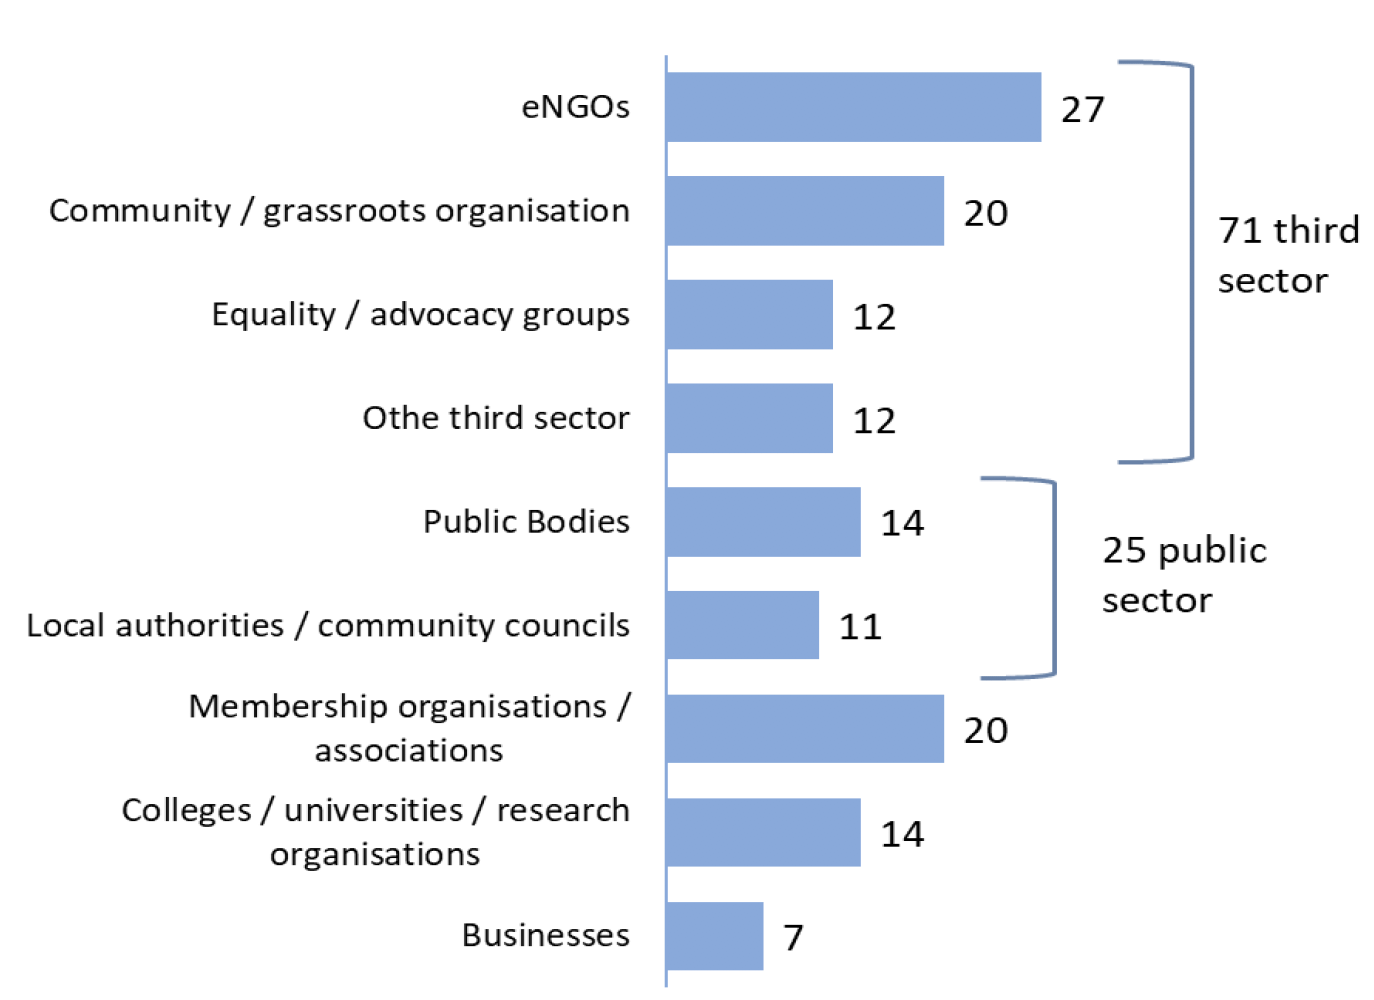 Bar chart showing number of responses by sector. 27 responses from eNGOs; 20 responses from community/grassroots organisations; 20 responses from membership organisations/associations; 14 responses from Public Bodies; 14 responses from colleges/universities/research organisations; 12 responses from equality / advocacy groups; 12 responses from other third sector organisations; 11 responses from local authorities/community councils; 7 responses from businesses.

The bar chart also shows that cumulatively there are 71 responses from the third sector, including all responses from eNGOs, community/grassroots organisations, equality/advocacy groups, and other third sector organisations, and 25 responses from the public sector, which includes Public Bodies as well as local authorities/community councils.
